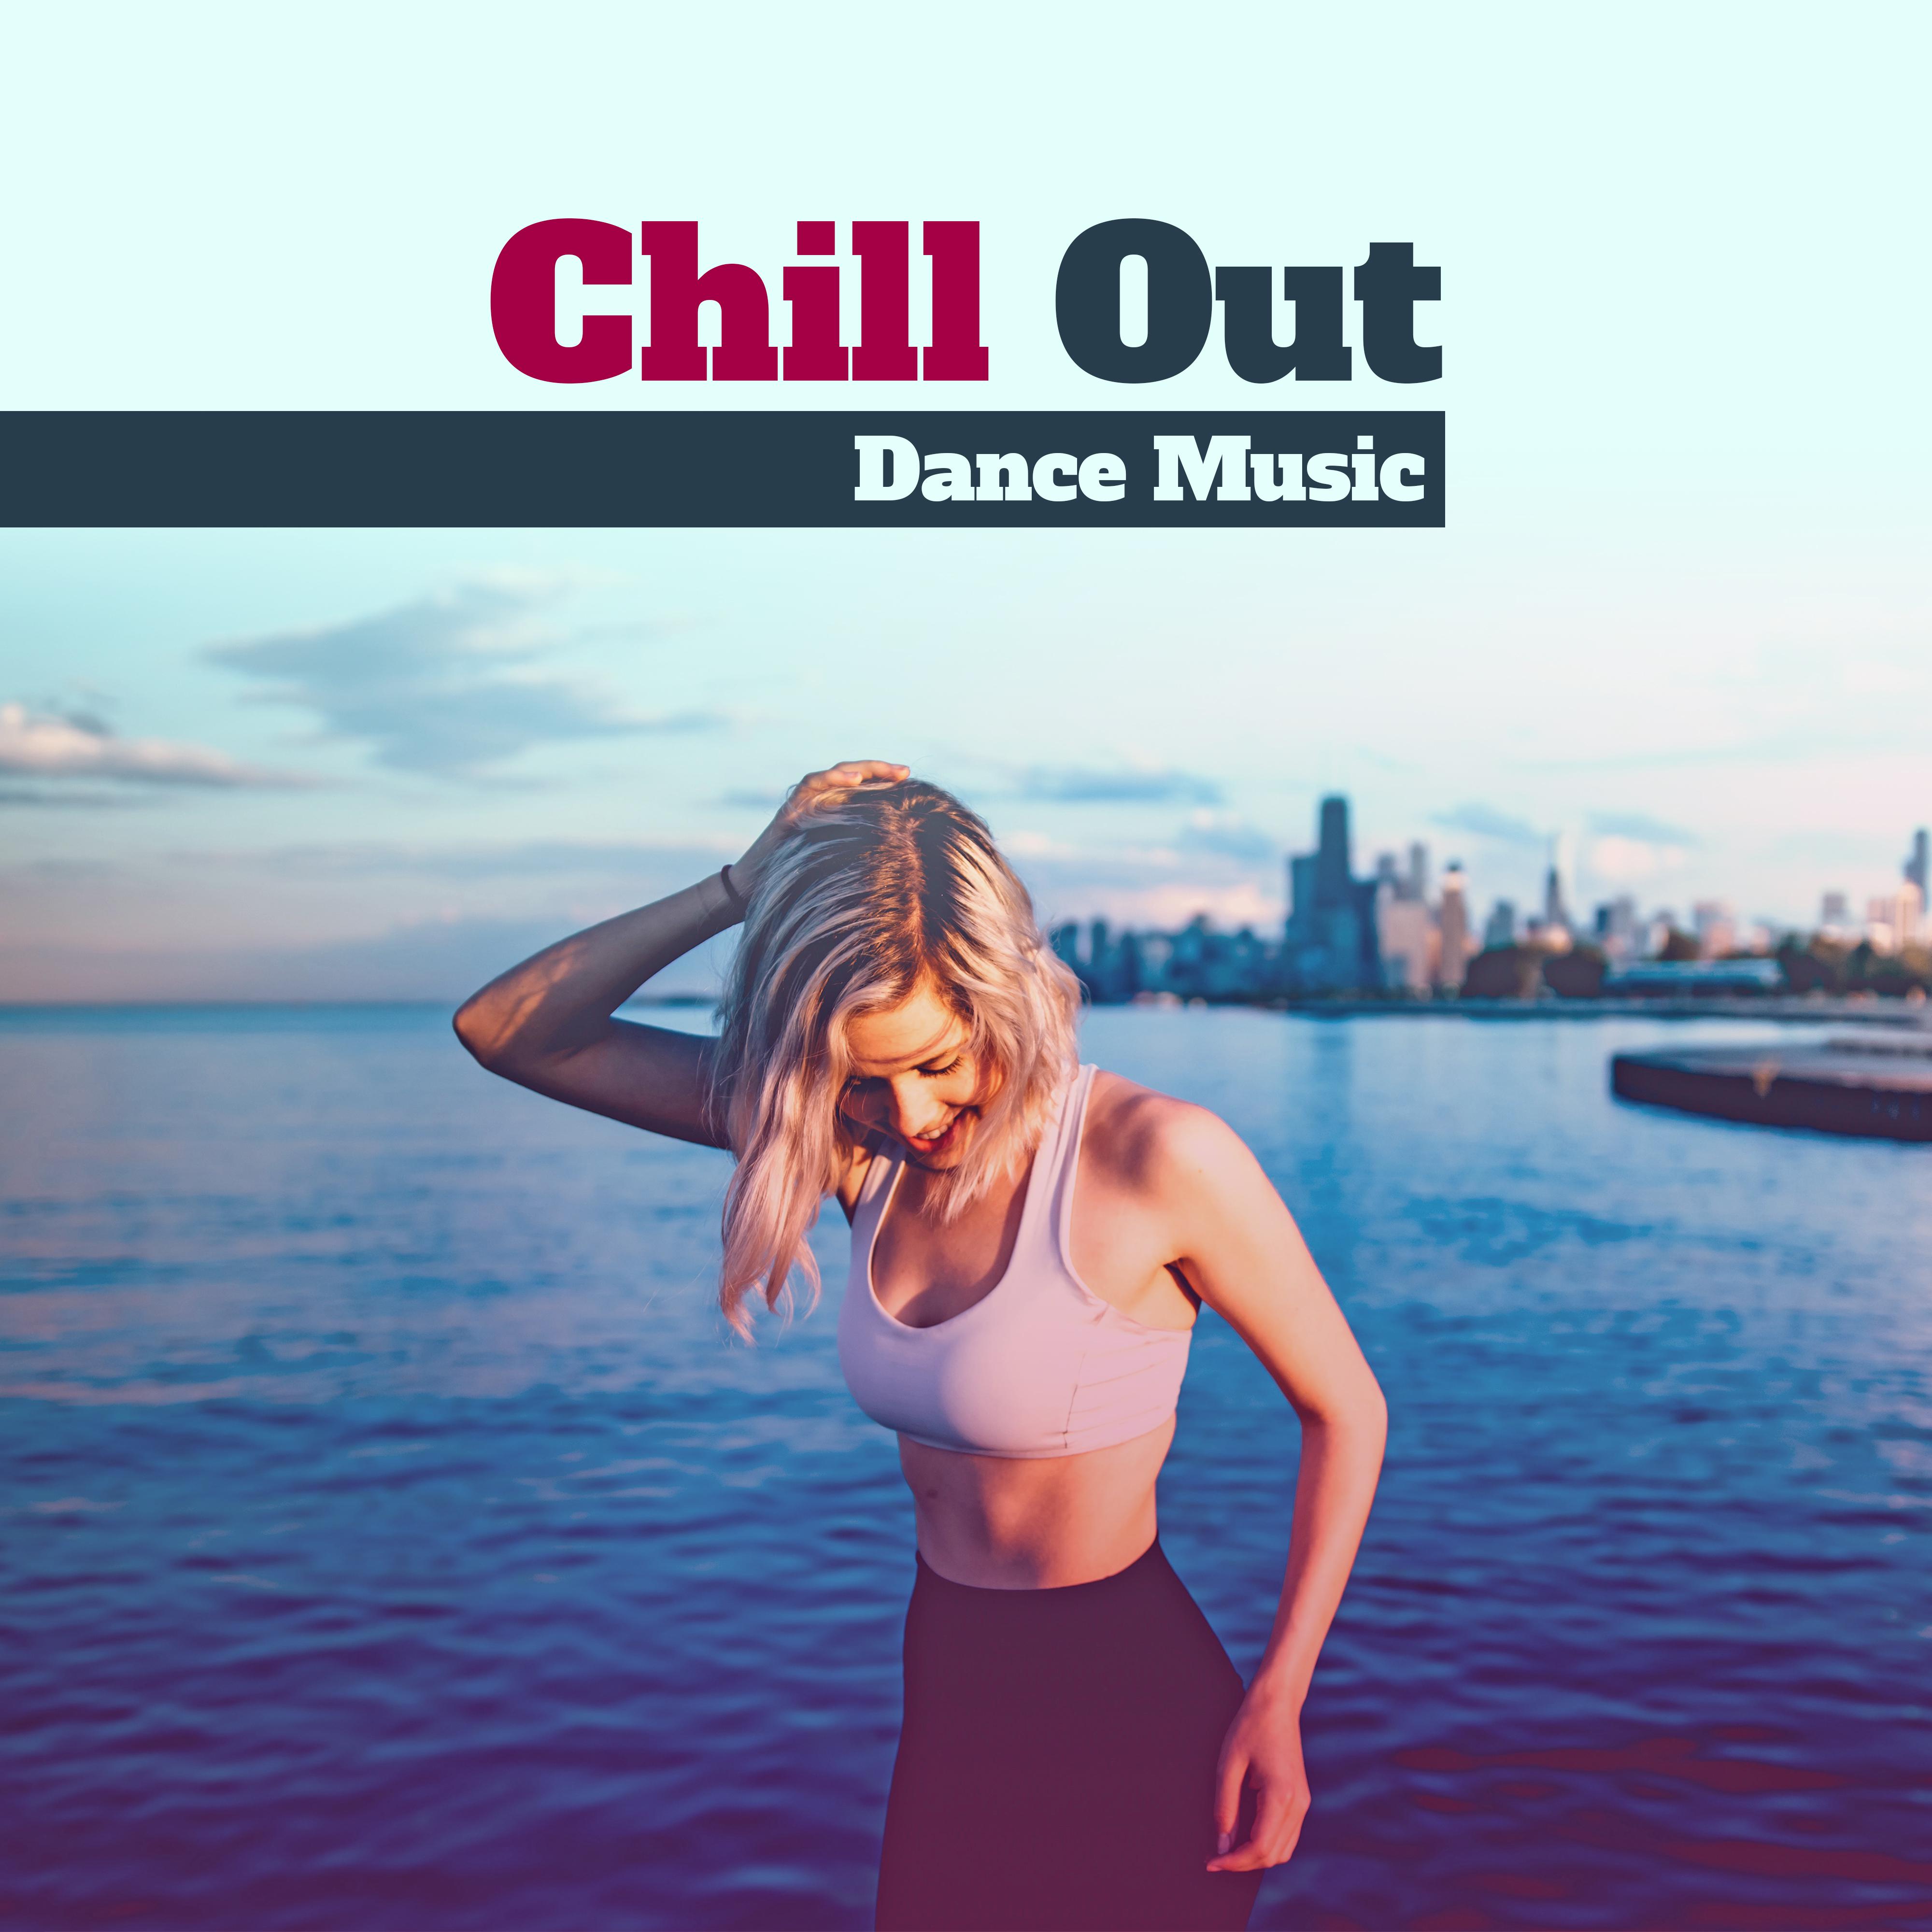 Chill Out Dance Music – Summer Dance Hits, Holiday Beats, Beach Vibes, Hot Music